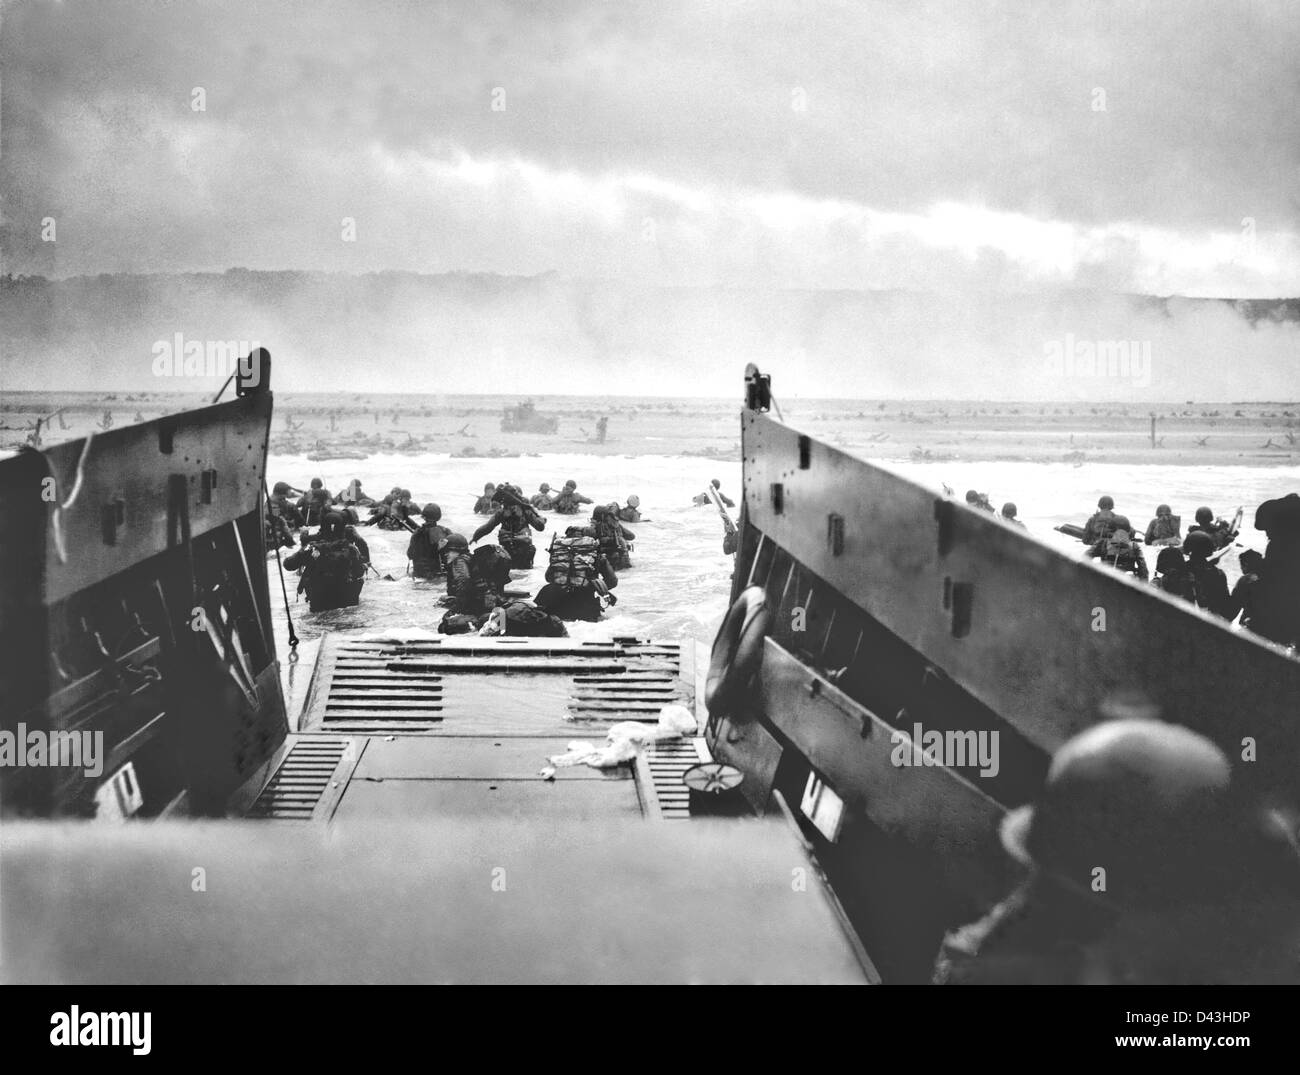 A US Coast Guard Landing Craft from the USS Samuel Chase disembarks troops of the US Army First Division on the morning the D-Day invasion June 6, 1944 at Omaha Beach, Normandy, France. Stock Photo